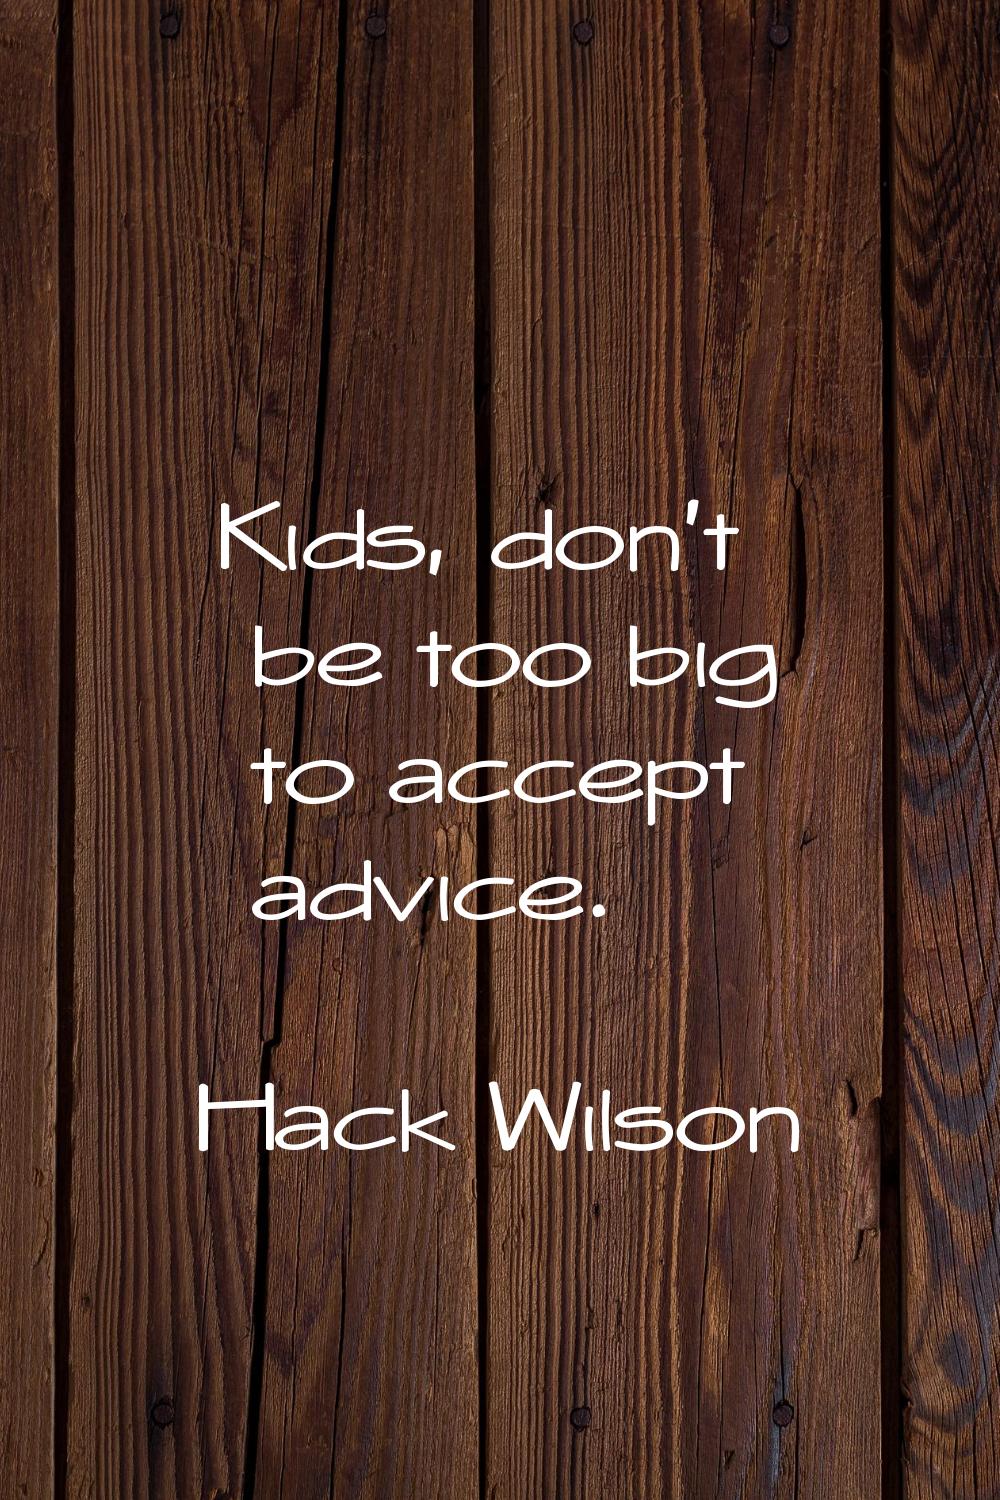 Kids, don't be too big to accept advice.